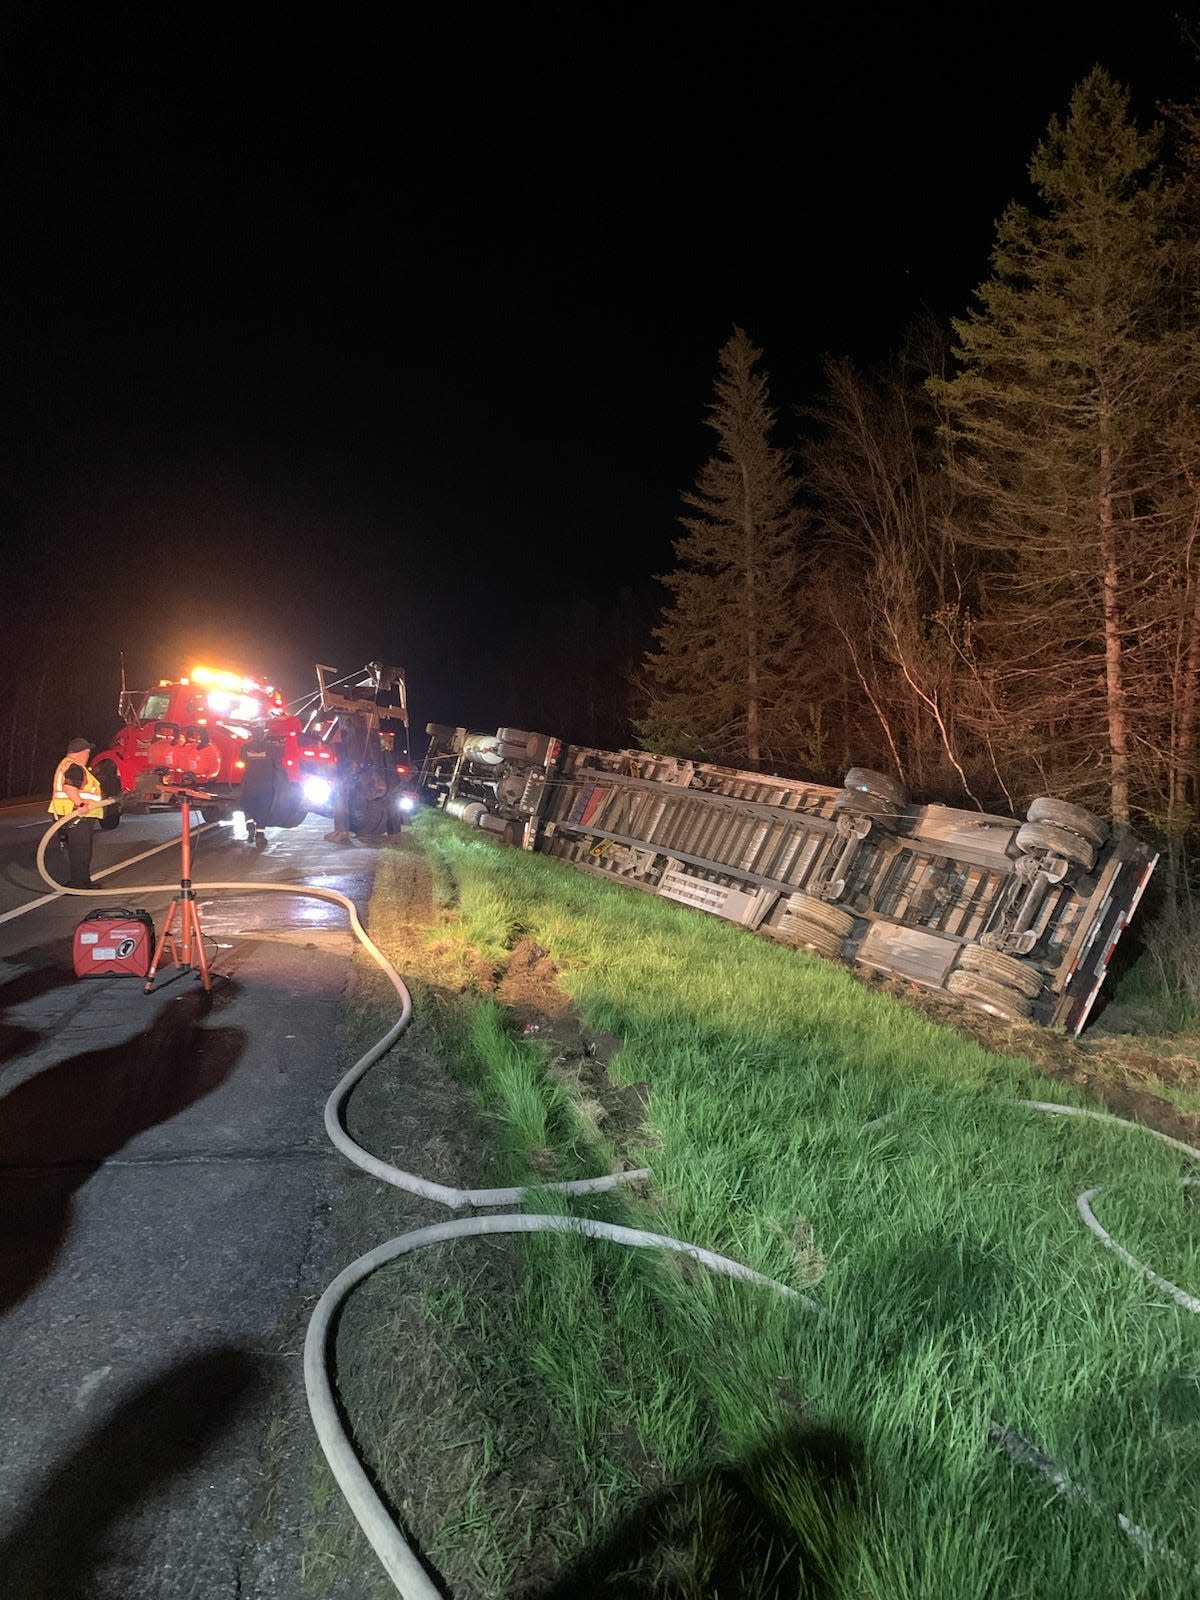 A tractor trailer carrying approximately 15 million bees rolled over Thursday night in Clinton, Maine. Officials say most of the bees were contained, intended for pollinating blueberry fields in Washington County.